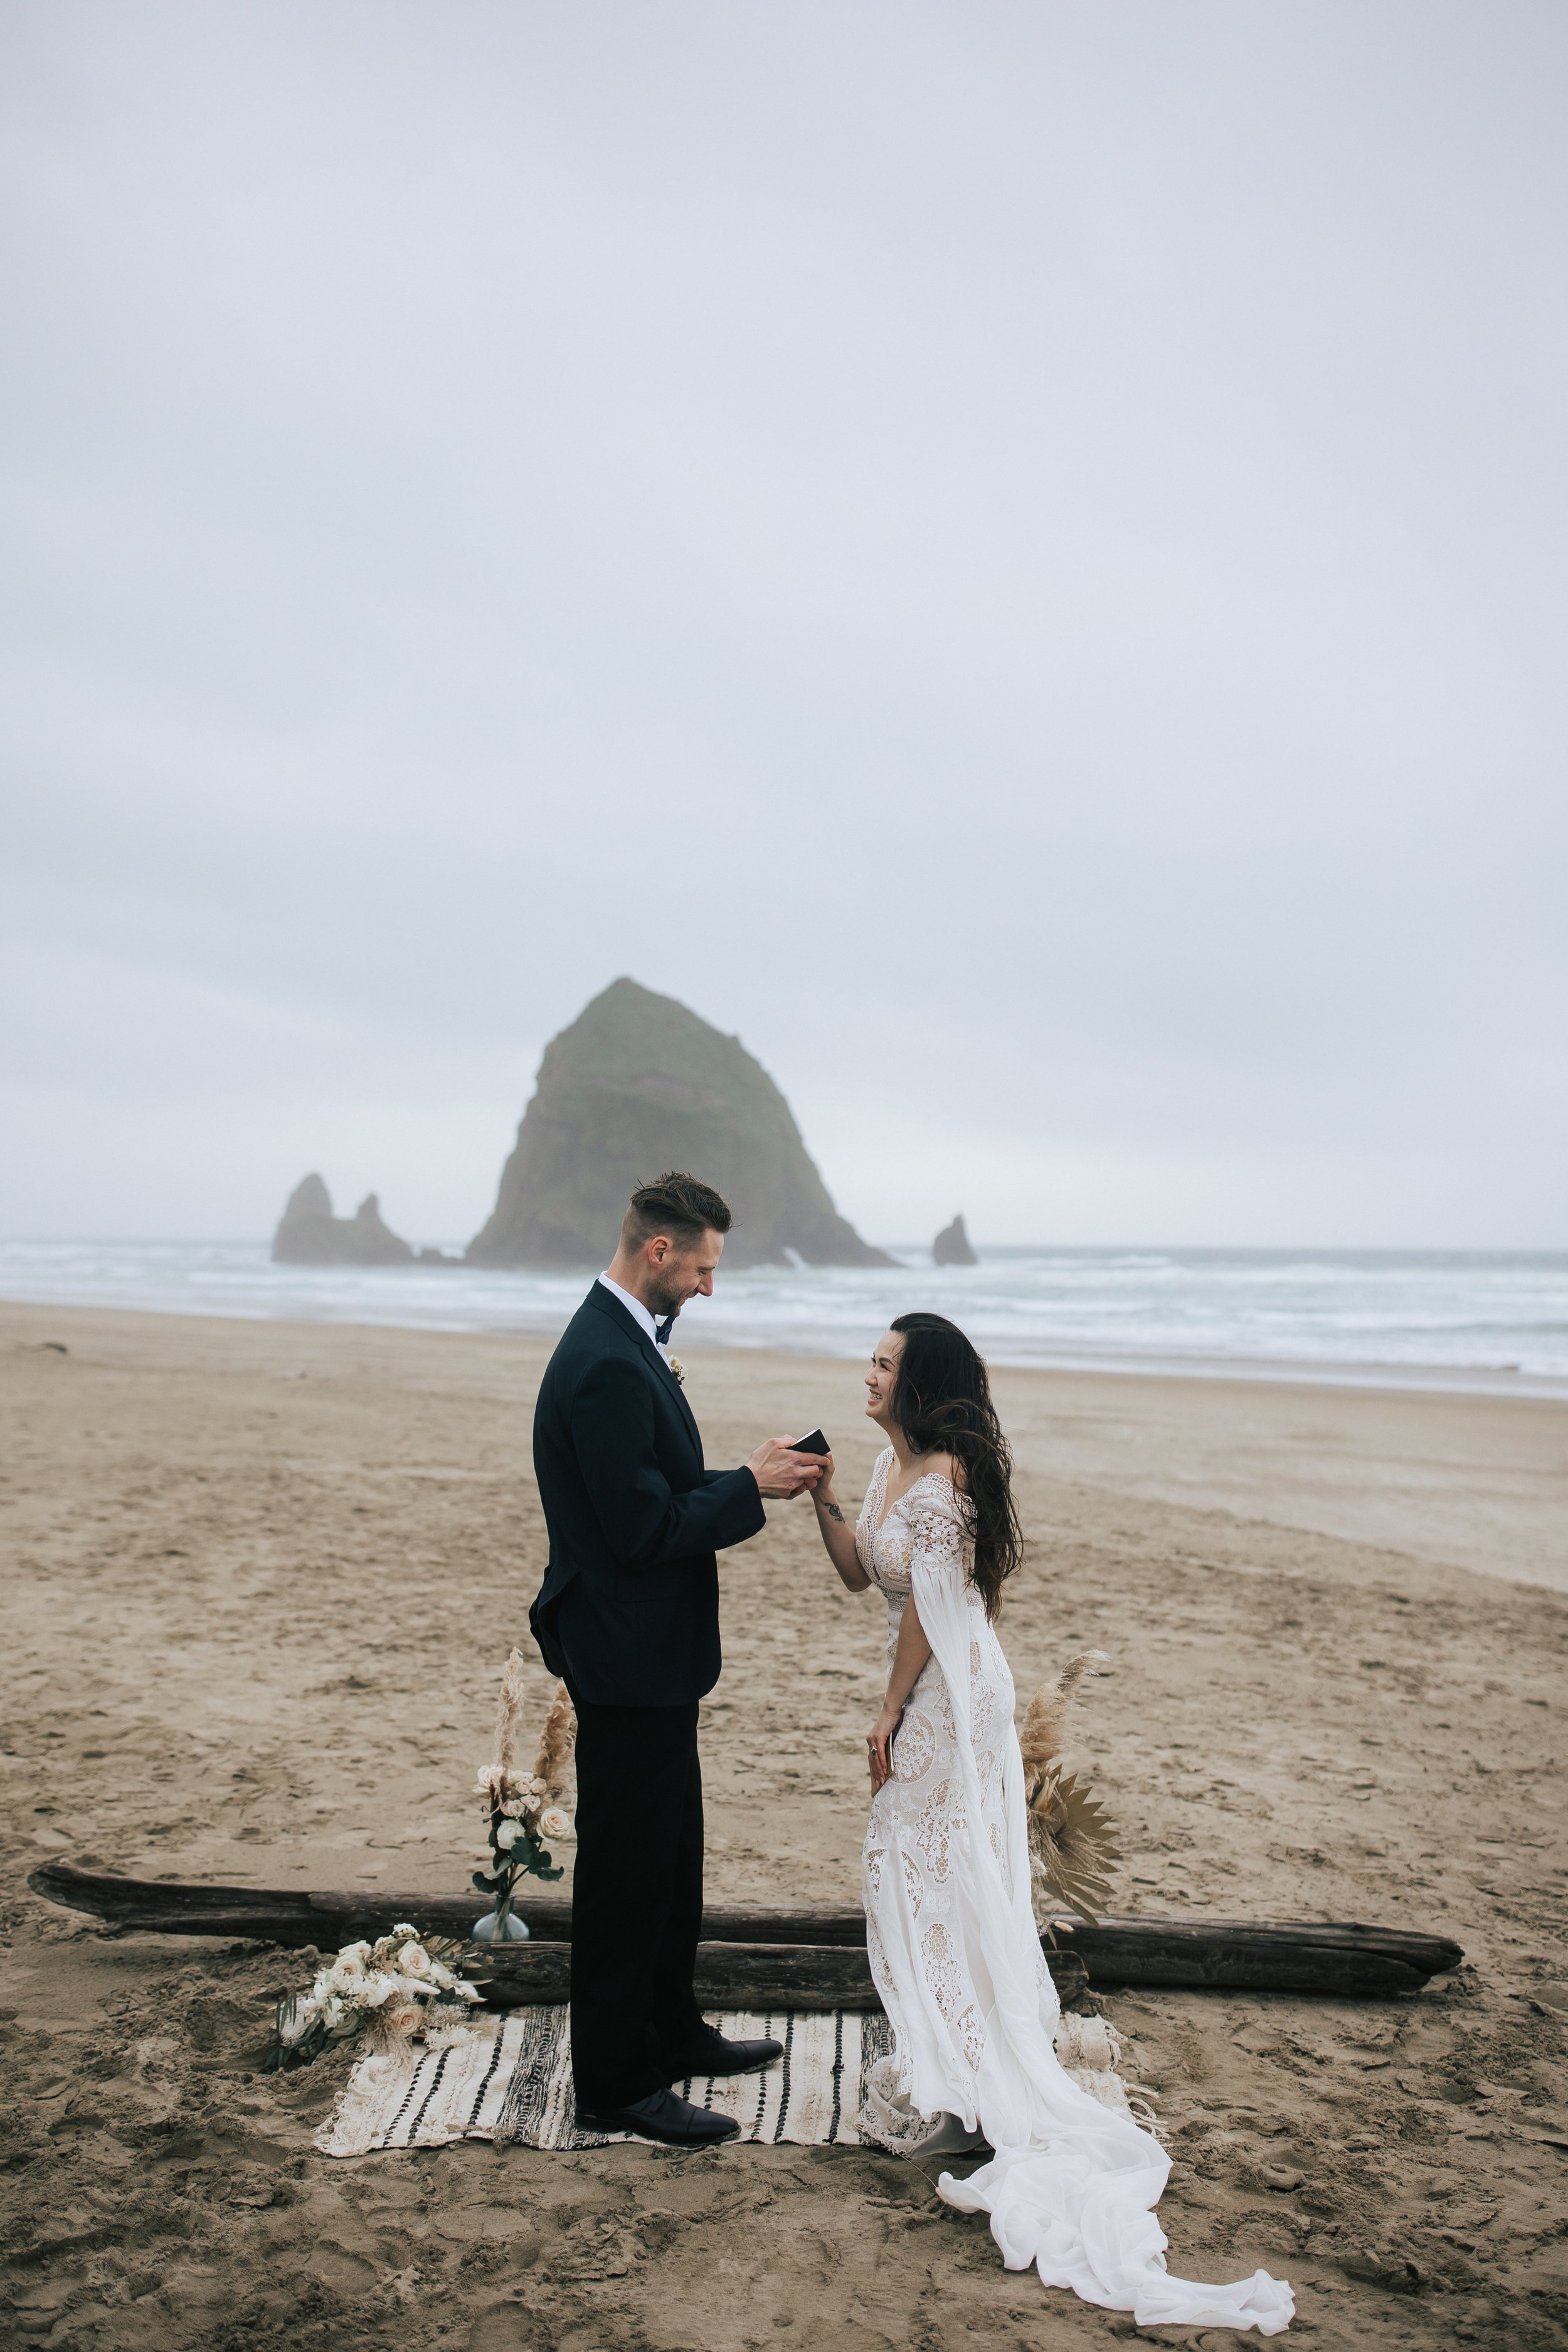  Groom reads vows to boho bride during beach wedding oceanside elopement in cannon beach photographed by pacific northwest elopement photographer emily jenkins photo seaside wedding pnw brides #pnw #pnwwedding #pnwelopement #cannonbeach #cannonbeache